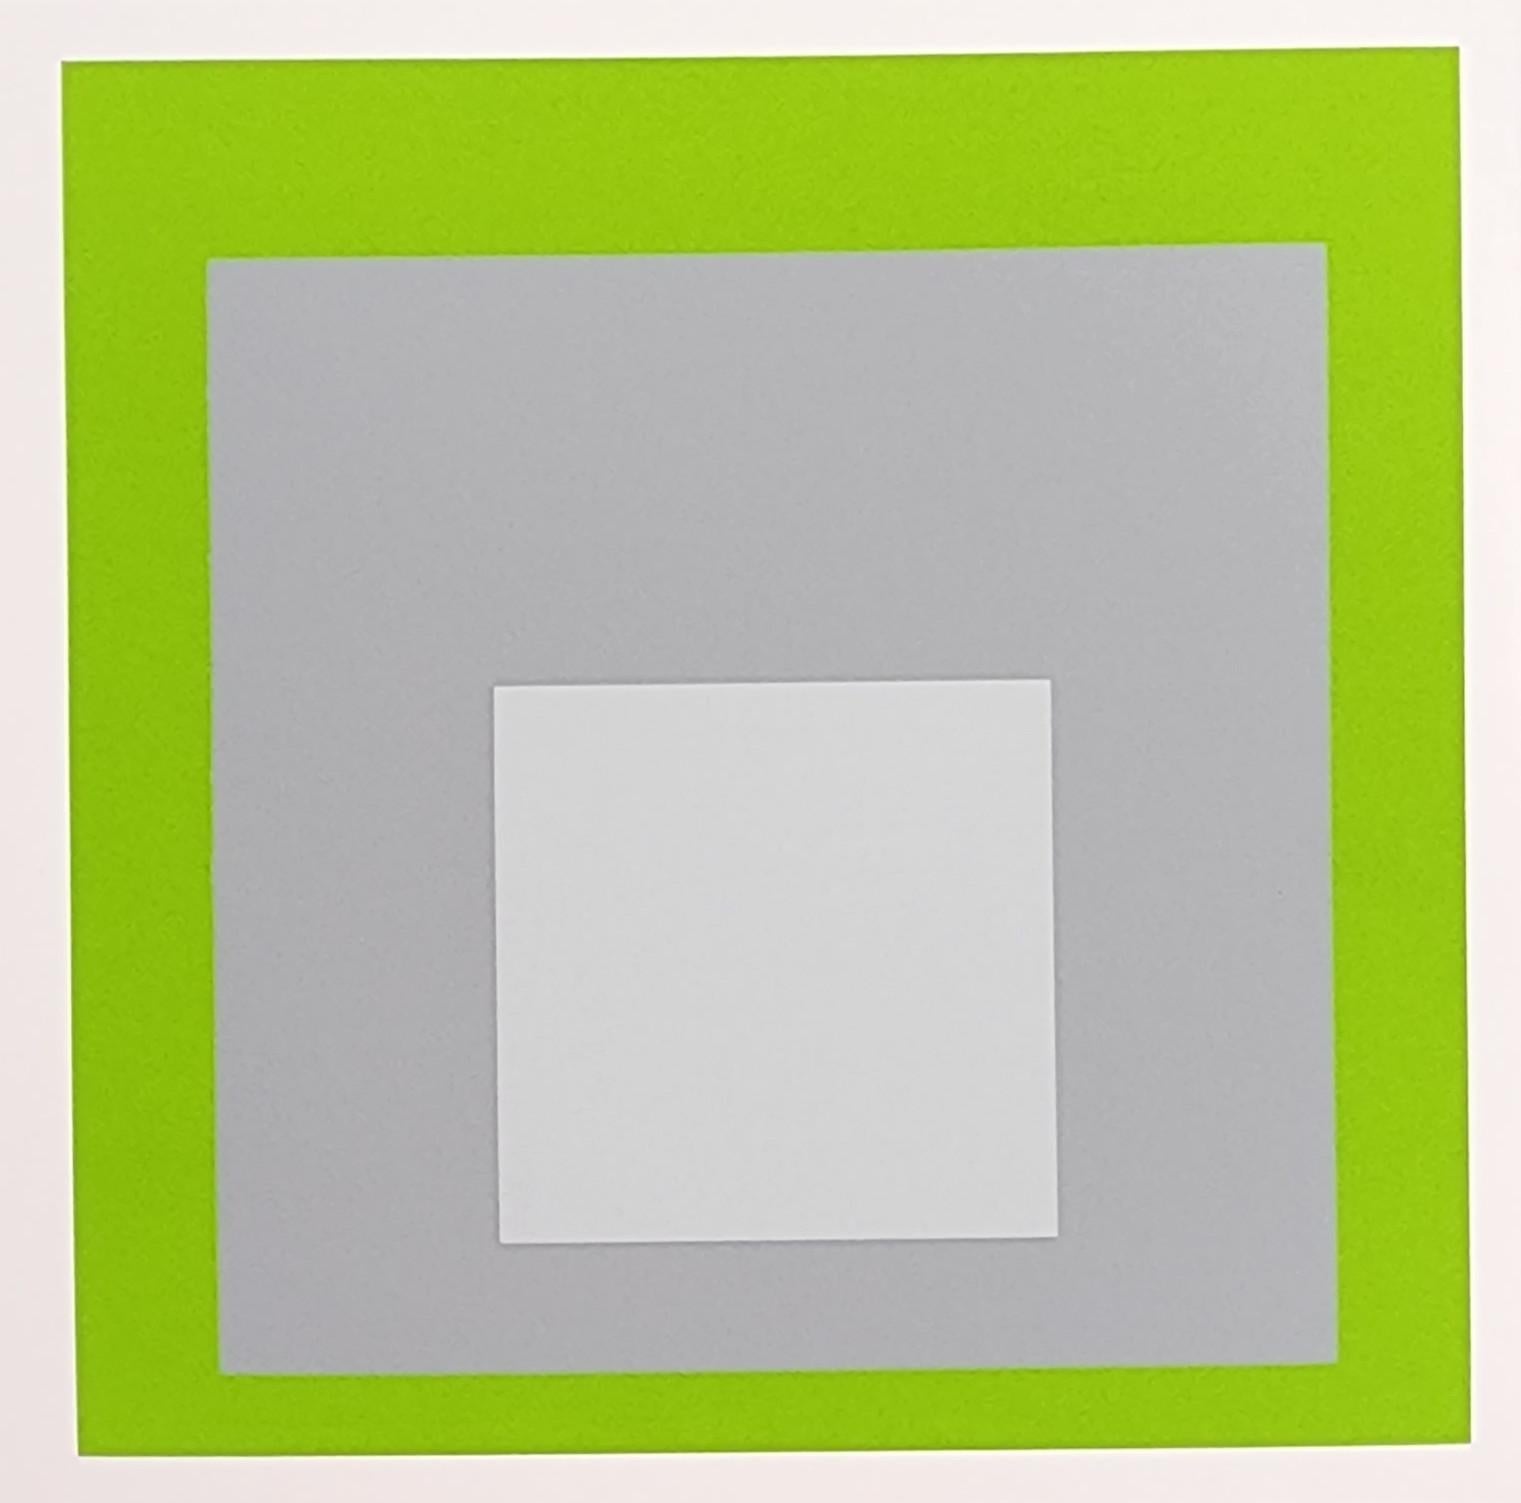 Homage to the Square: White Marker (Bauhaus, Minimalism, 50% OFF LIST PRICE) - Print by (after) Josef Albers